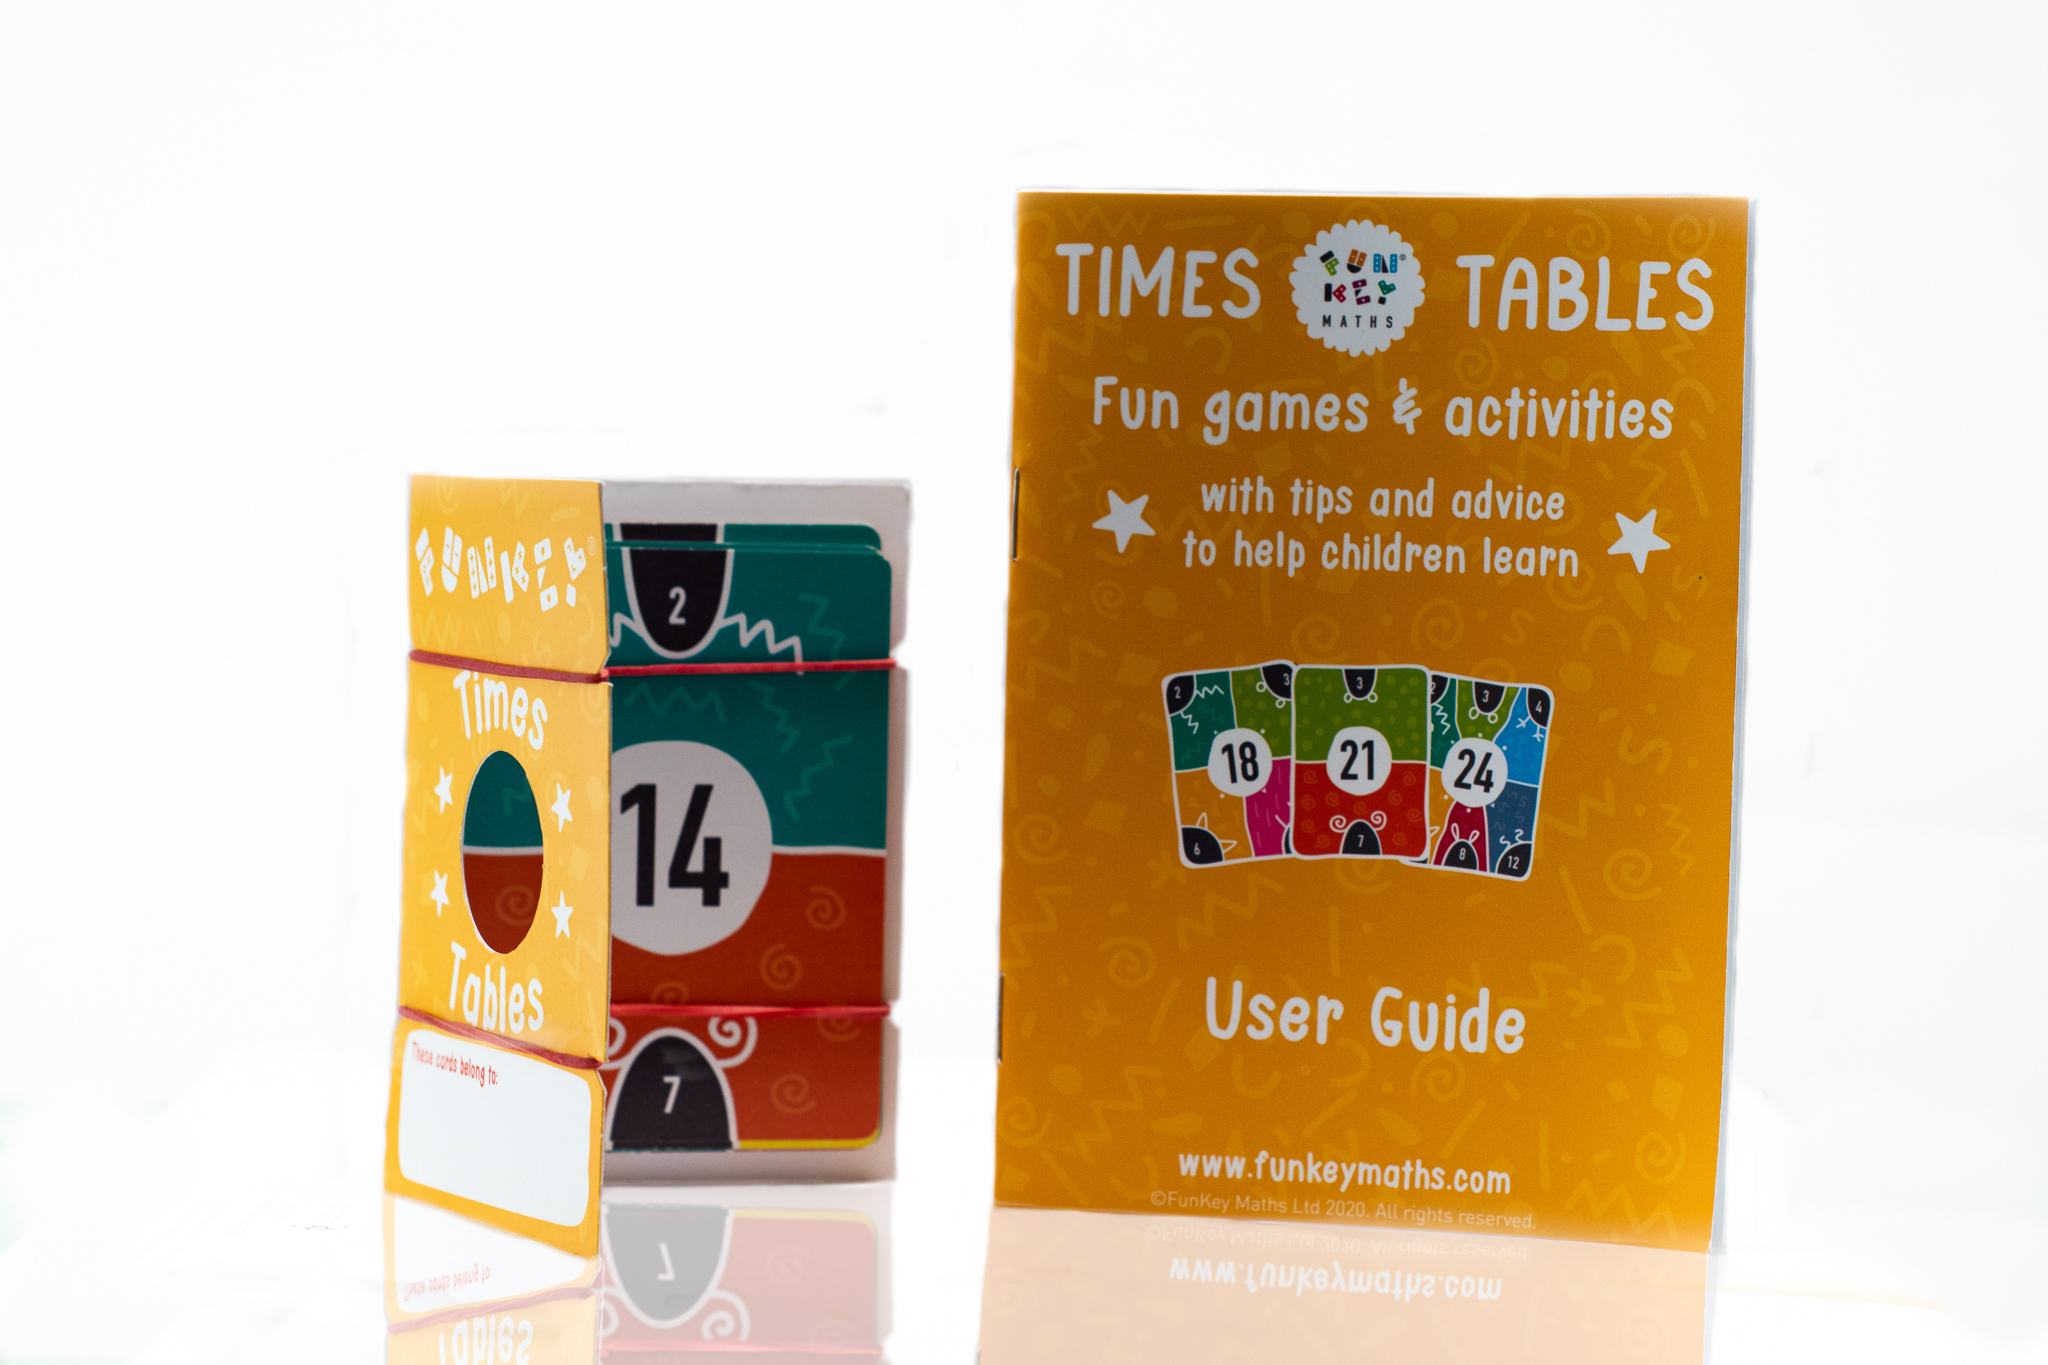 Cardholder and user guide for Times Tables Maths Cards